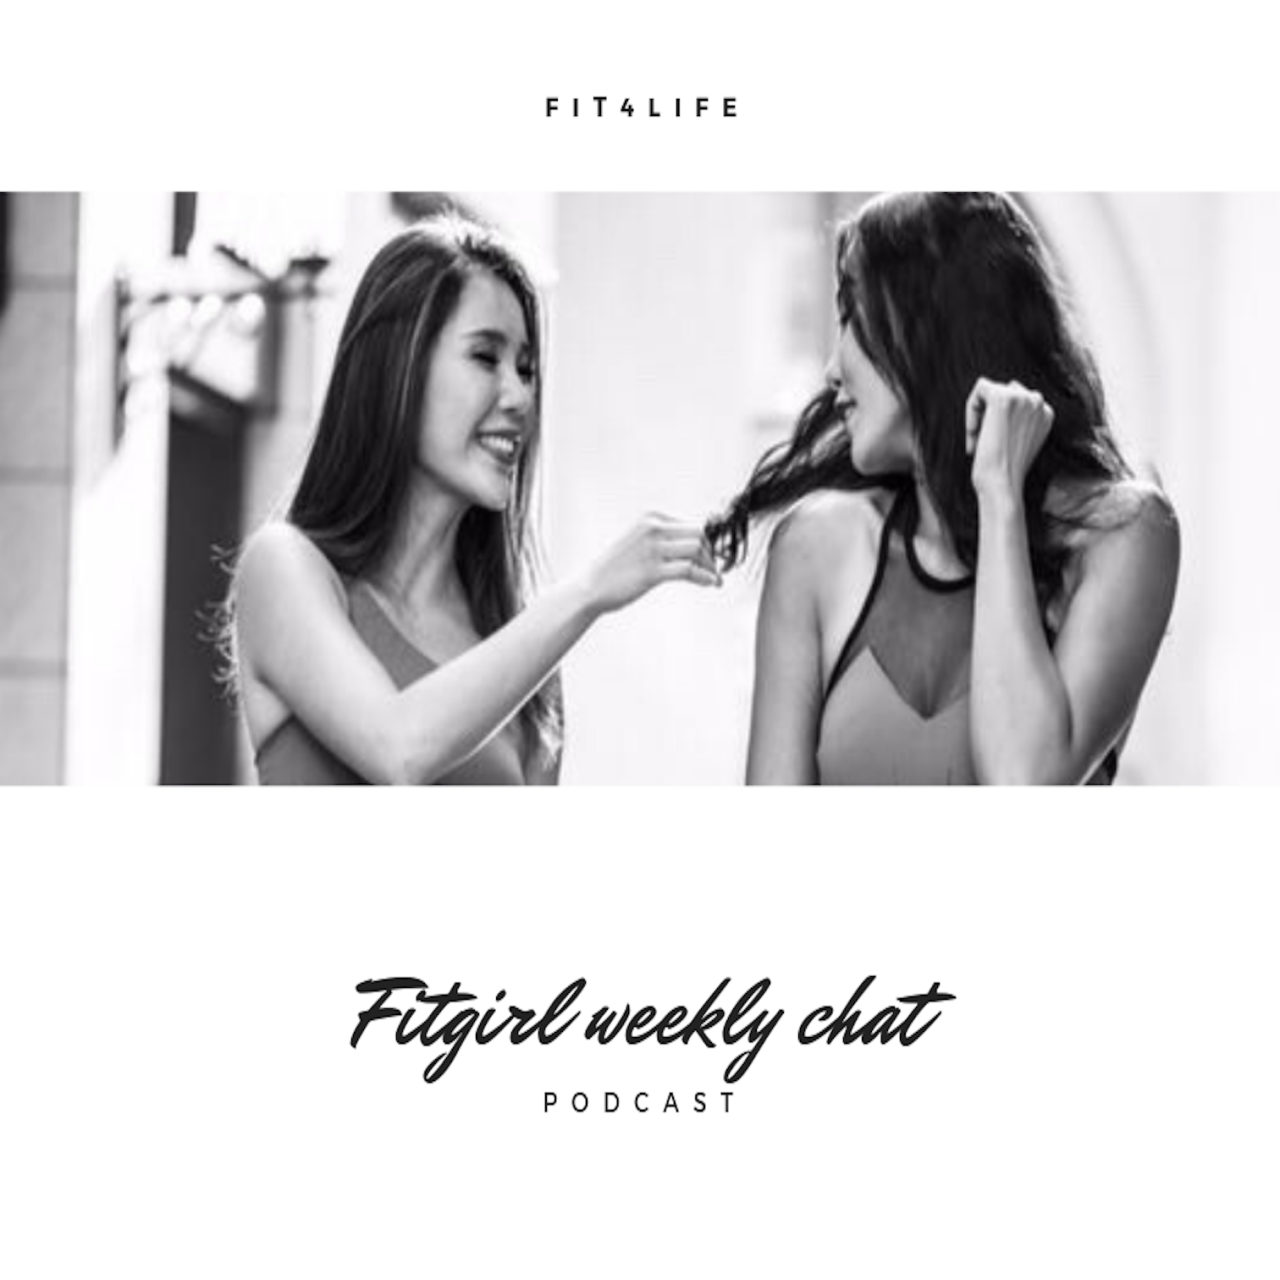 fit4life - fitgirl weekly chat